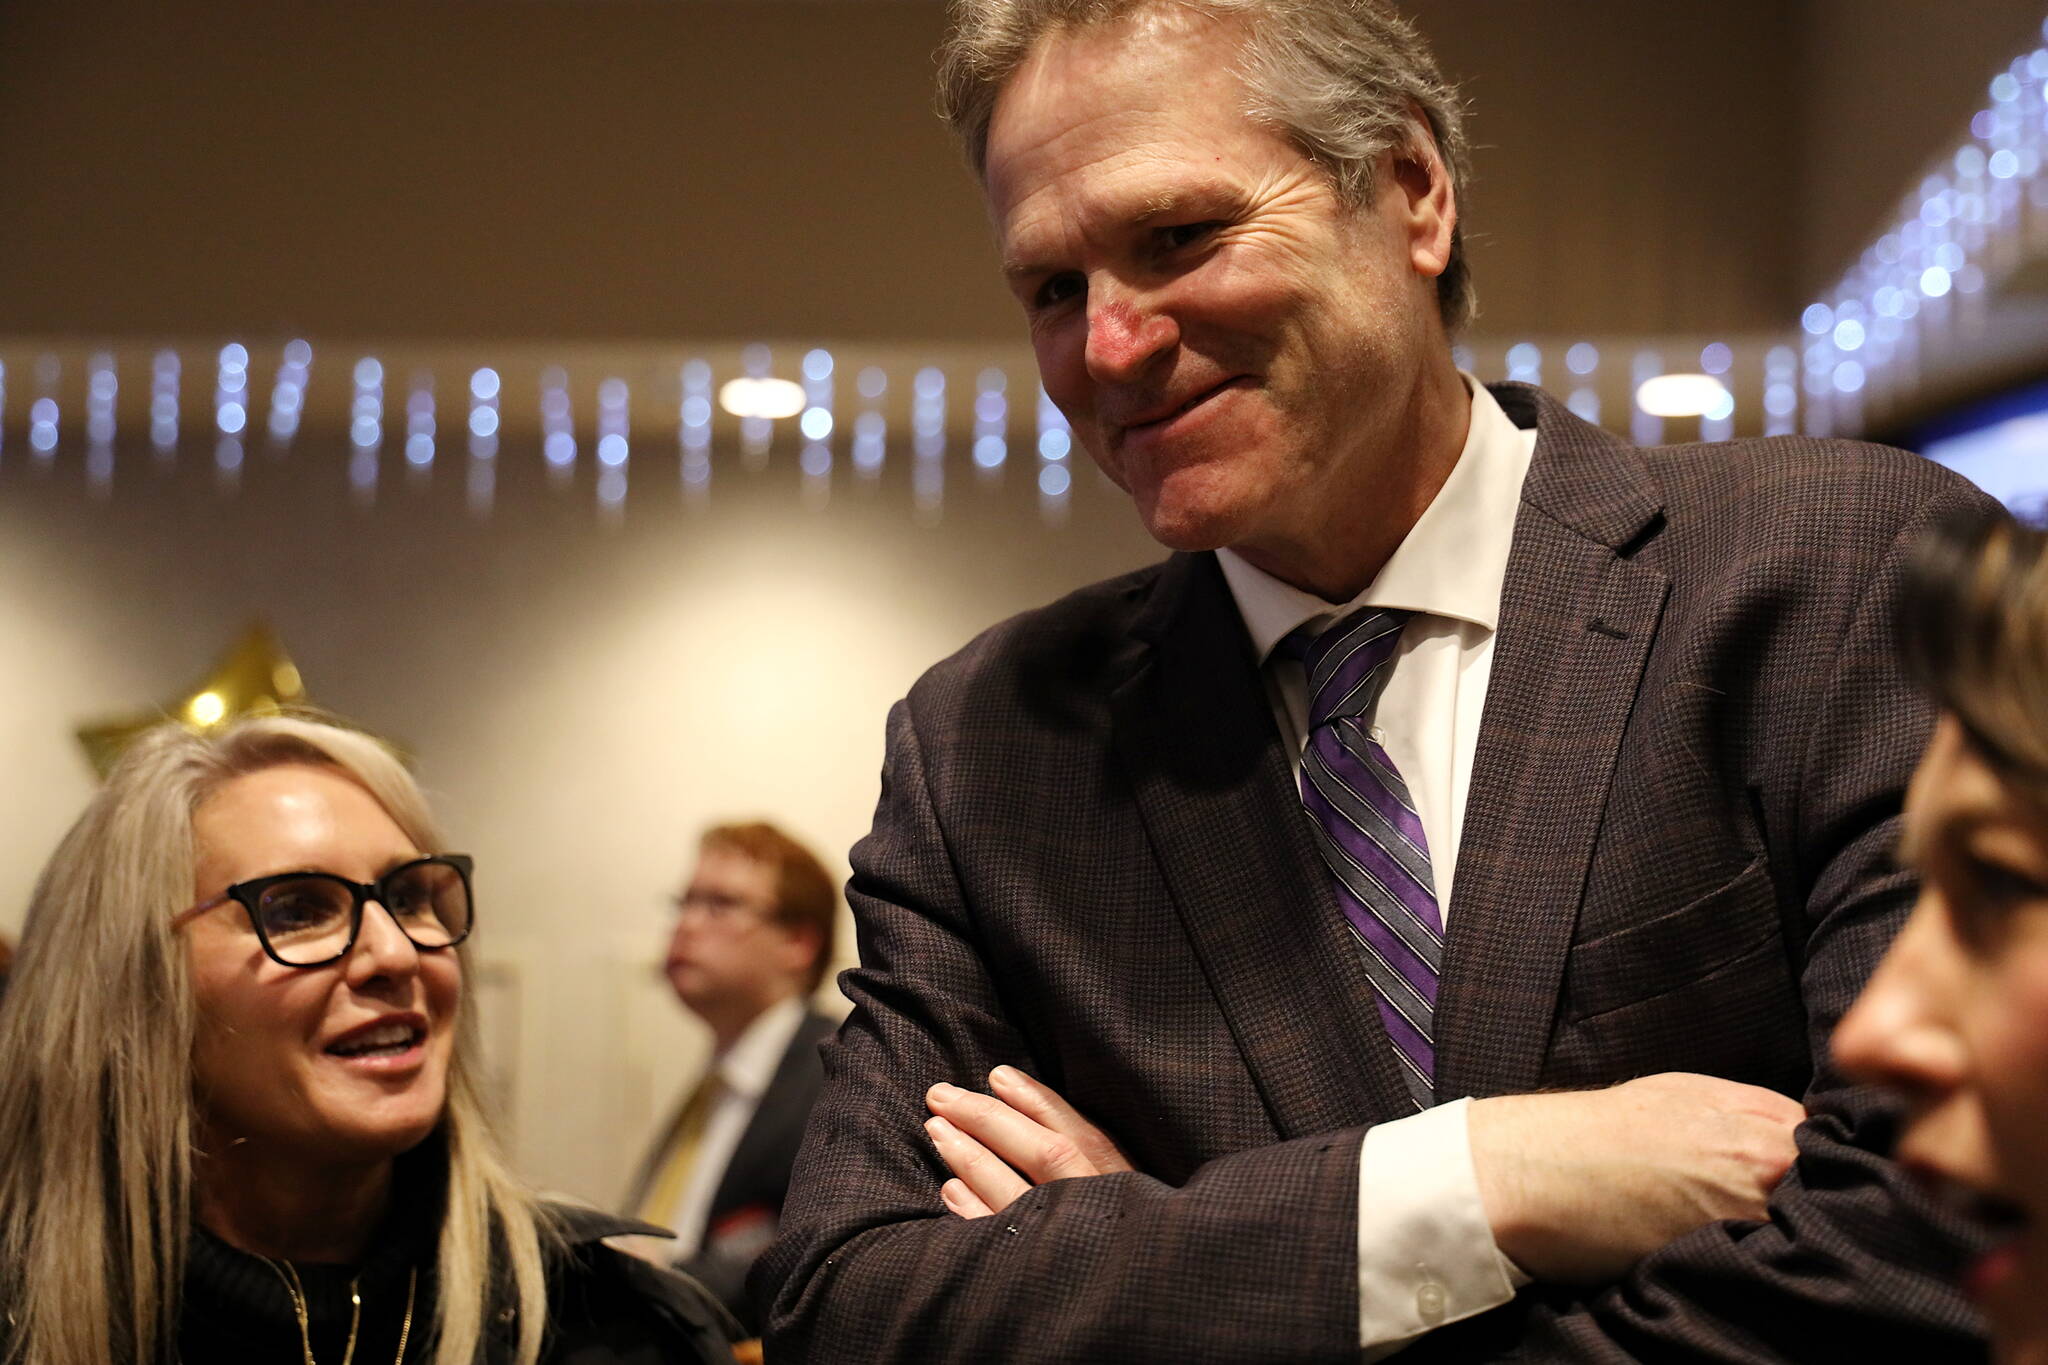 Gov. Mike Dunleavy talks with local residents and people involved with this year’s legislative session during an annual welcoming reception hosted by city government and business leaders Tuesday at Elizabeth Peratrovich Hall. Dunleavy is scheduled to deliver his annual State of the State address, the first of his second term, to a joint session of the Alaska State Legislature at 7 p.m. Monday. (Clarise Larson / Juneau Empire)